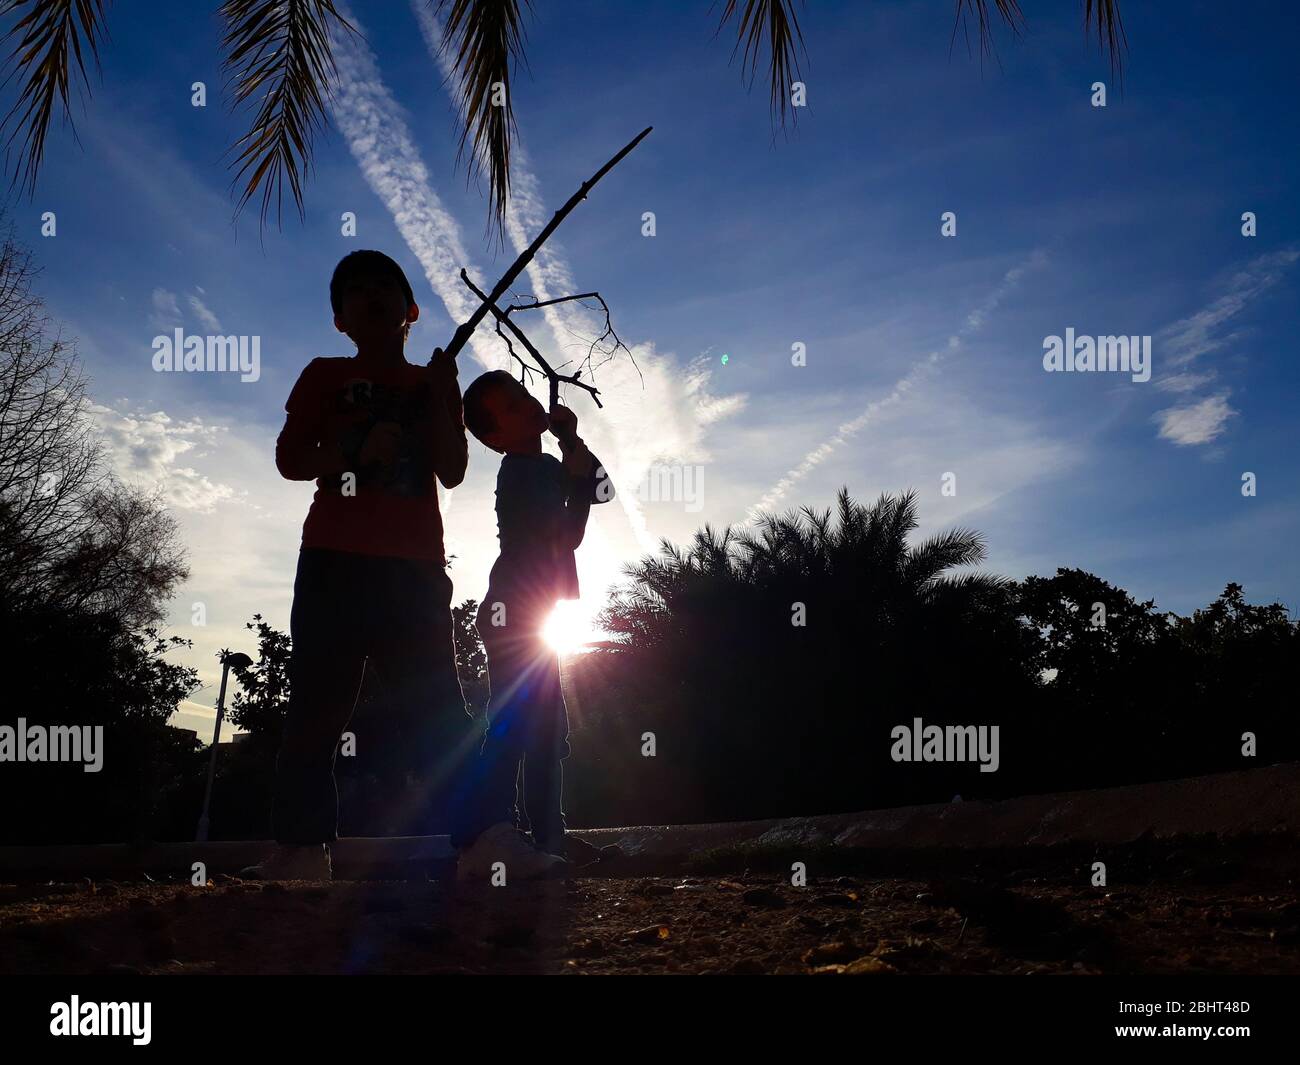 Silhouettes of two backlit children playing outdoors against a bluish sky. Stock Photo